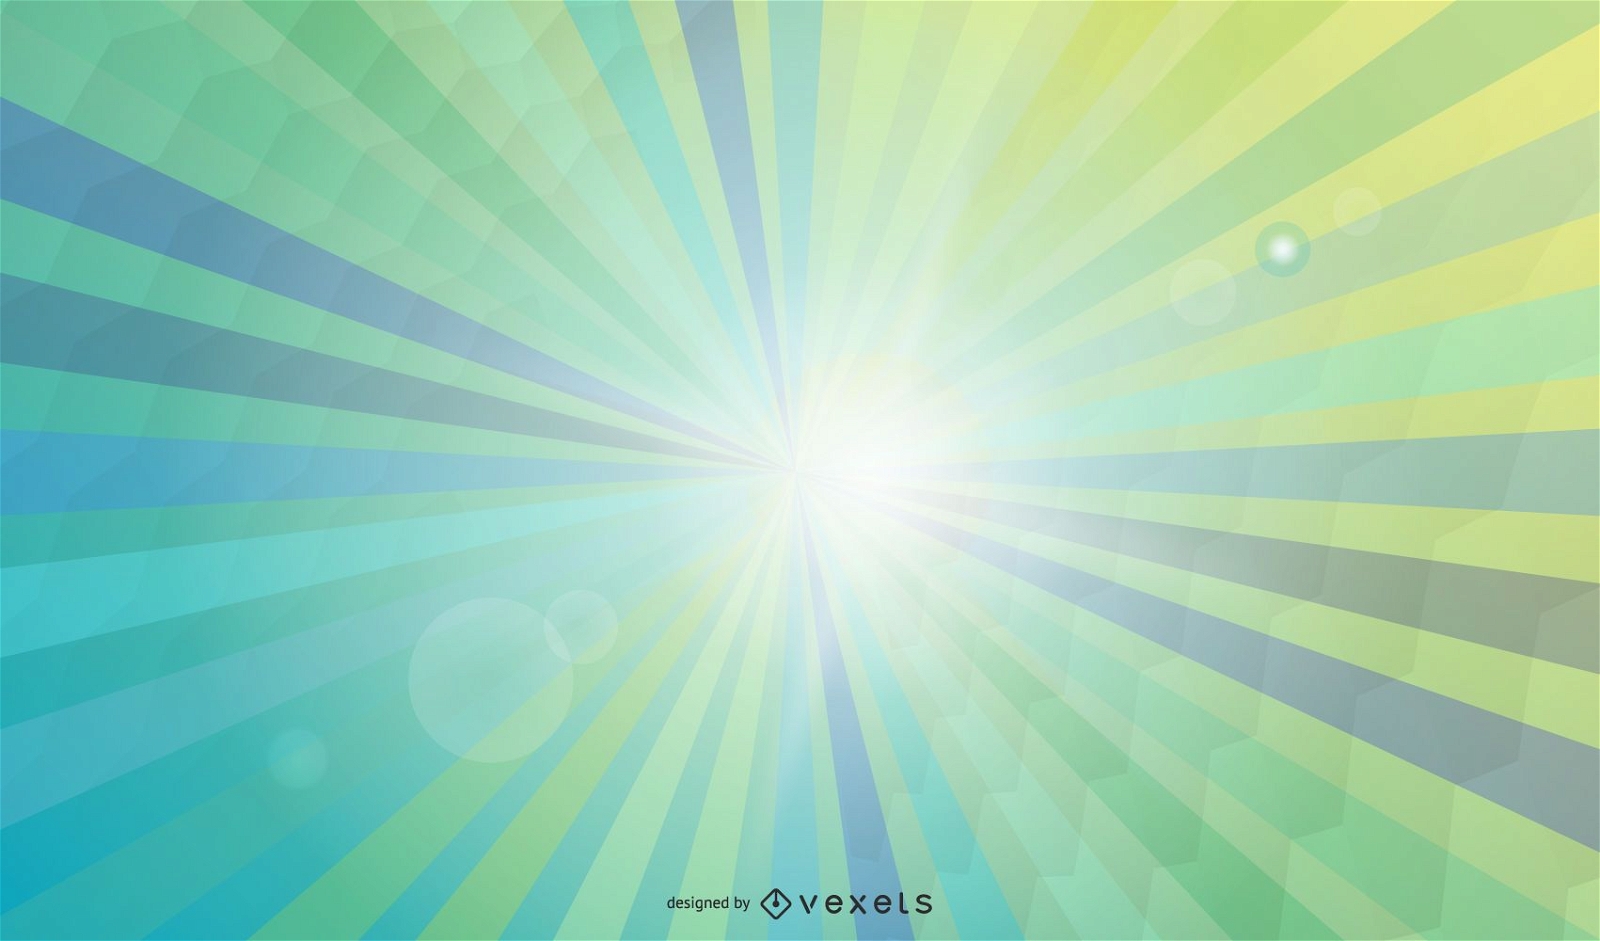 Shiny Blue & Green Sun Rays Background Vector Download